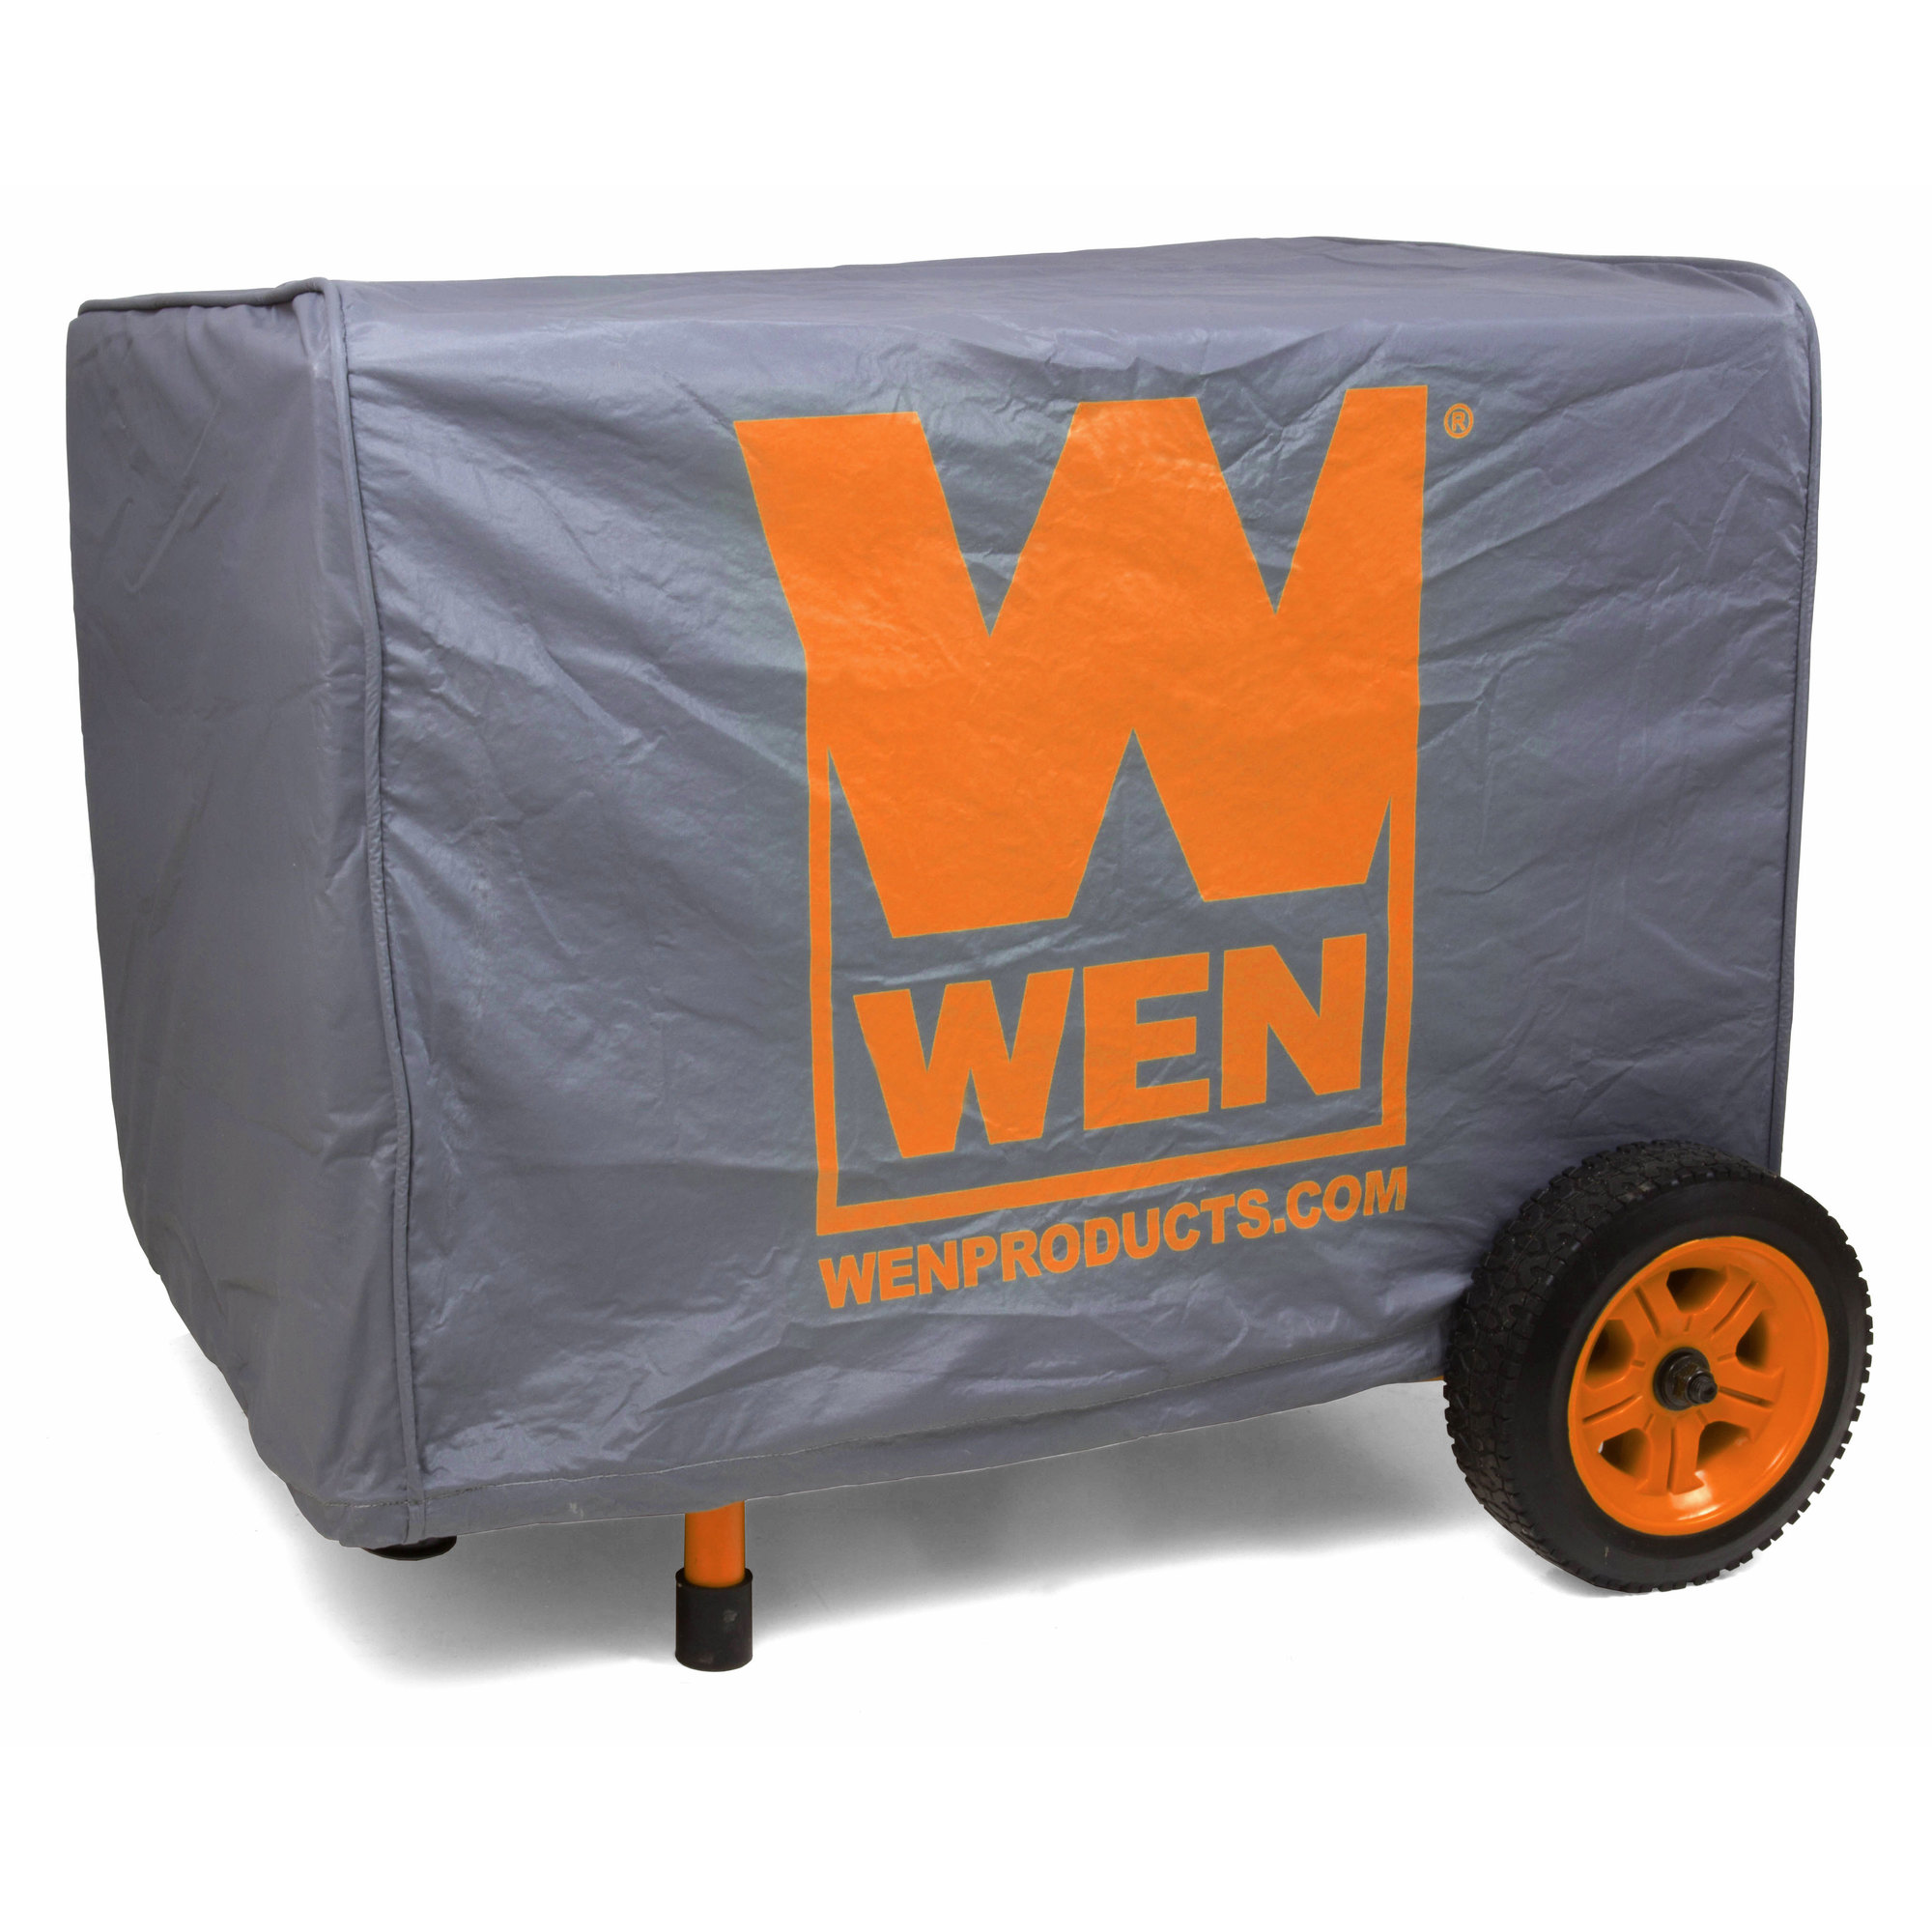 WEN, Generator Cover, Material Vinyl, Closure Type Other, Compatible With Other, Model 56409